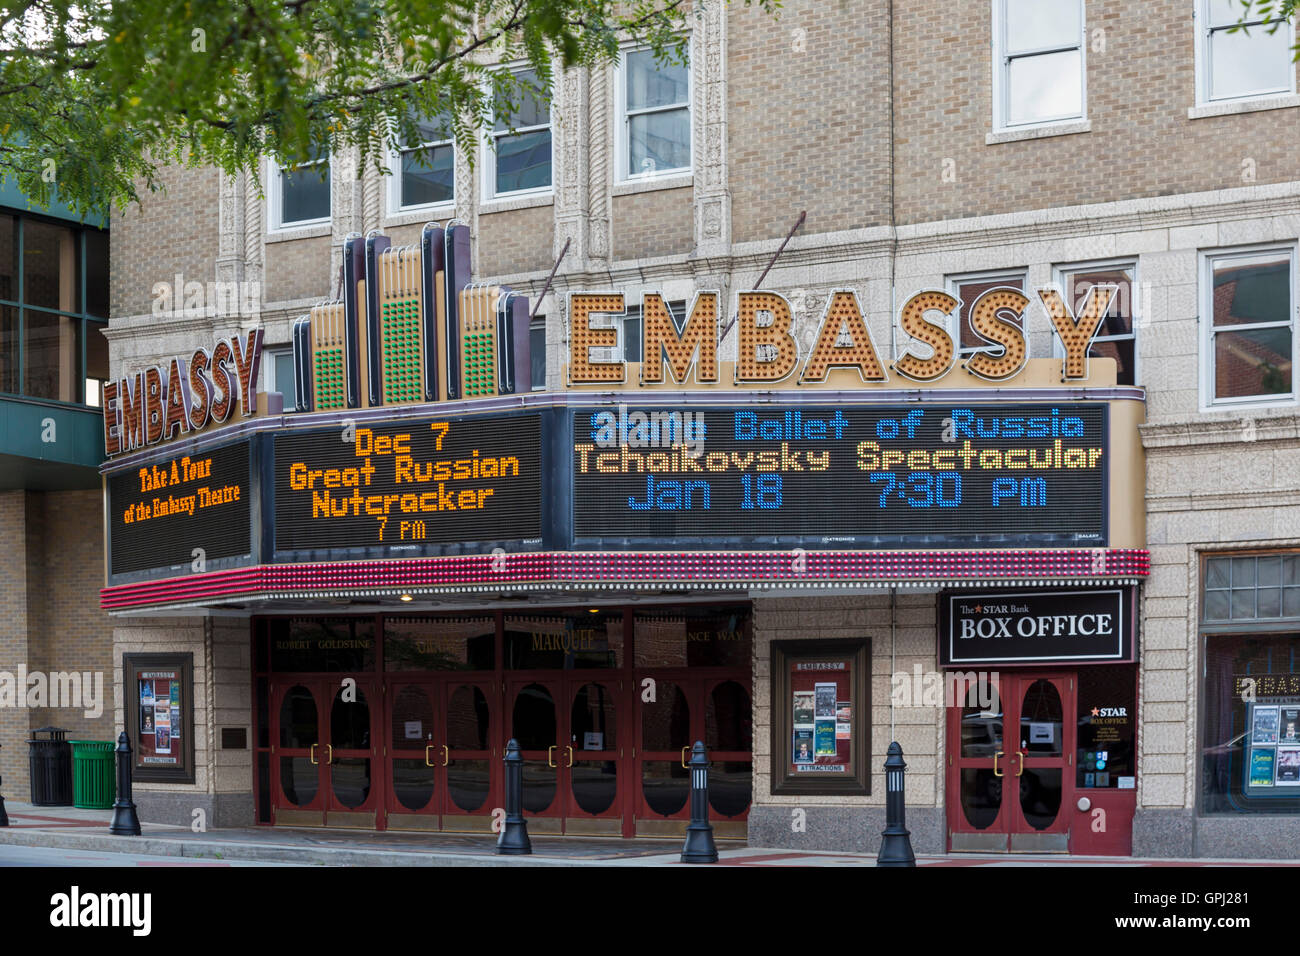 Fort Wayne, Indiana - The Embassy Theatre, a performing arts center. Stock Photo